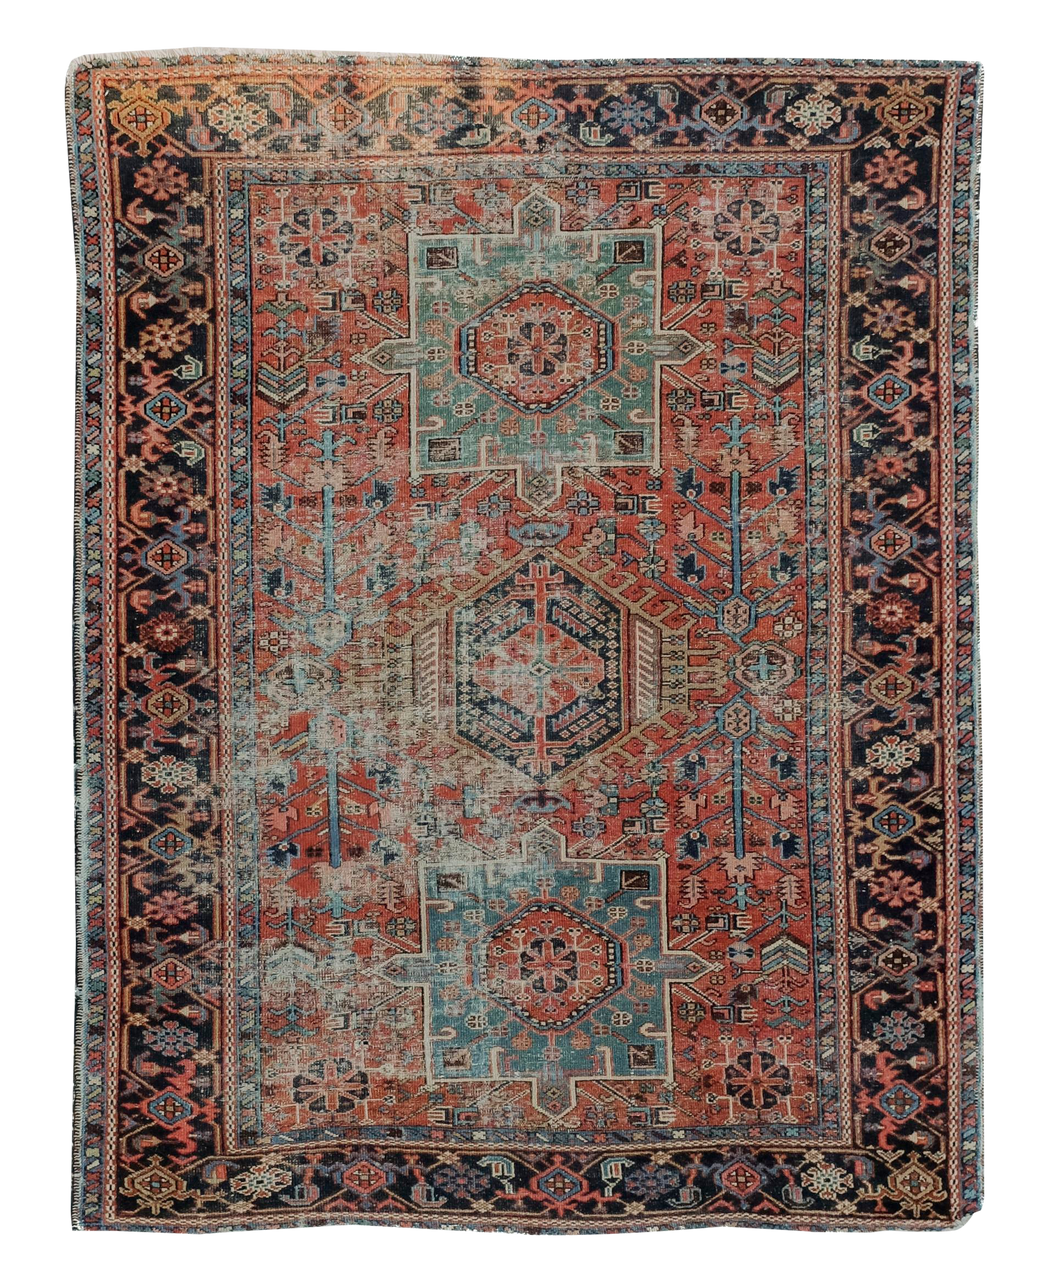 Antique Persian Karaja Red and Blue Rug Late 19th Century - 4'9